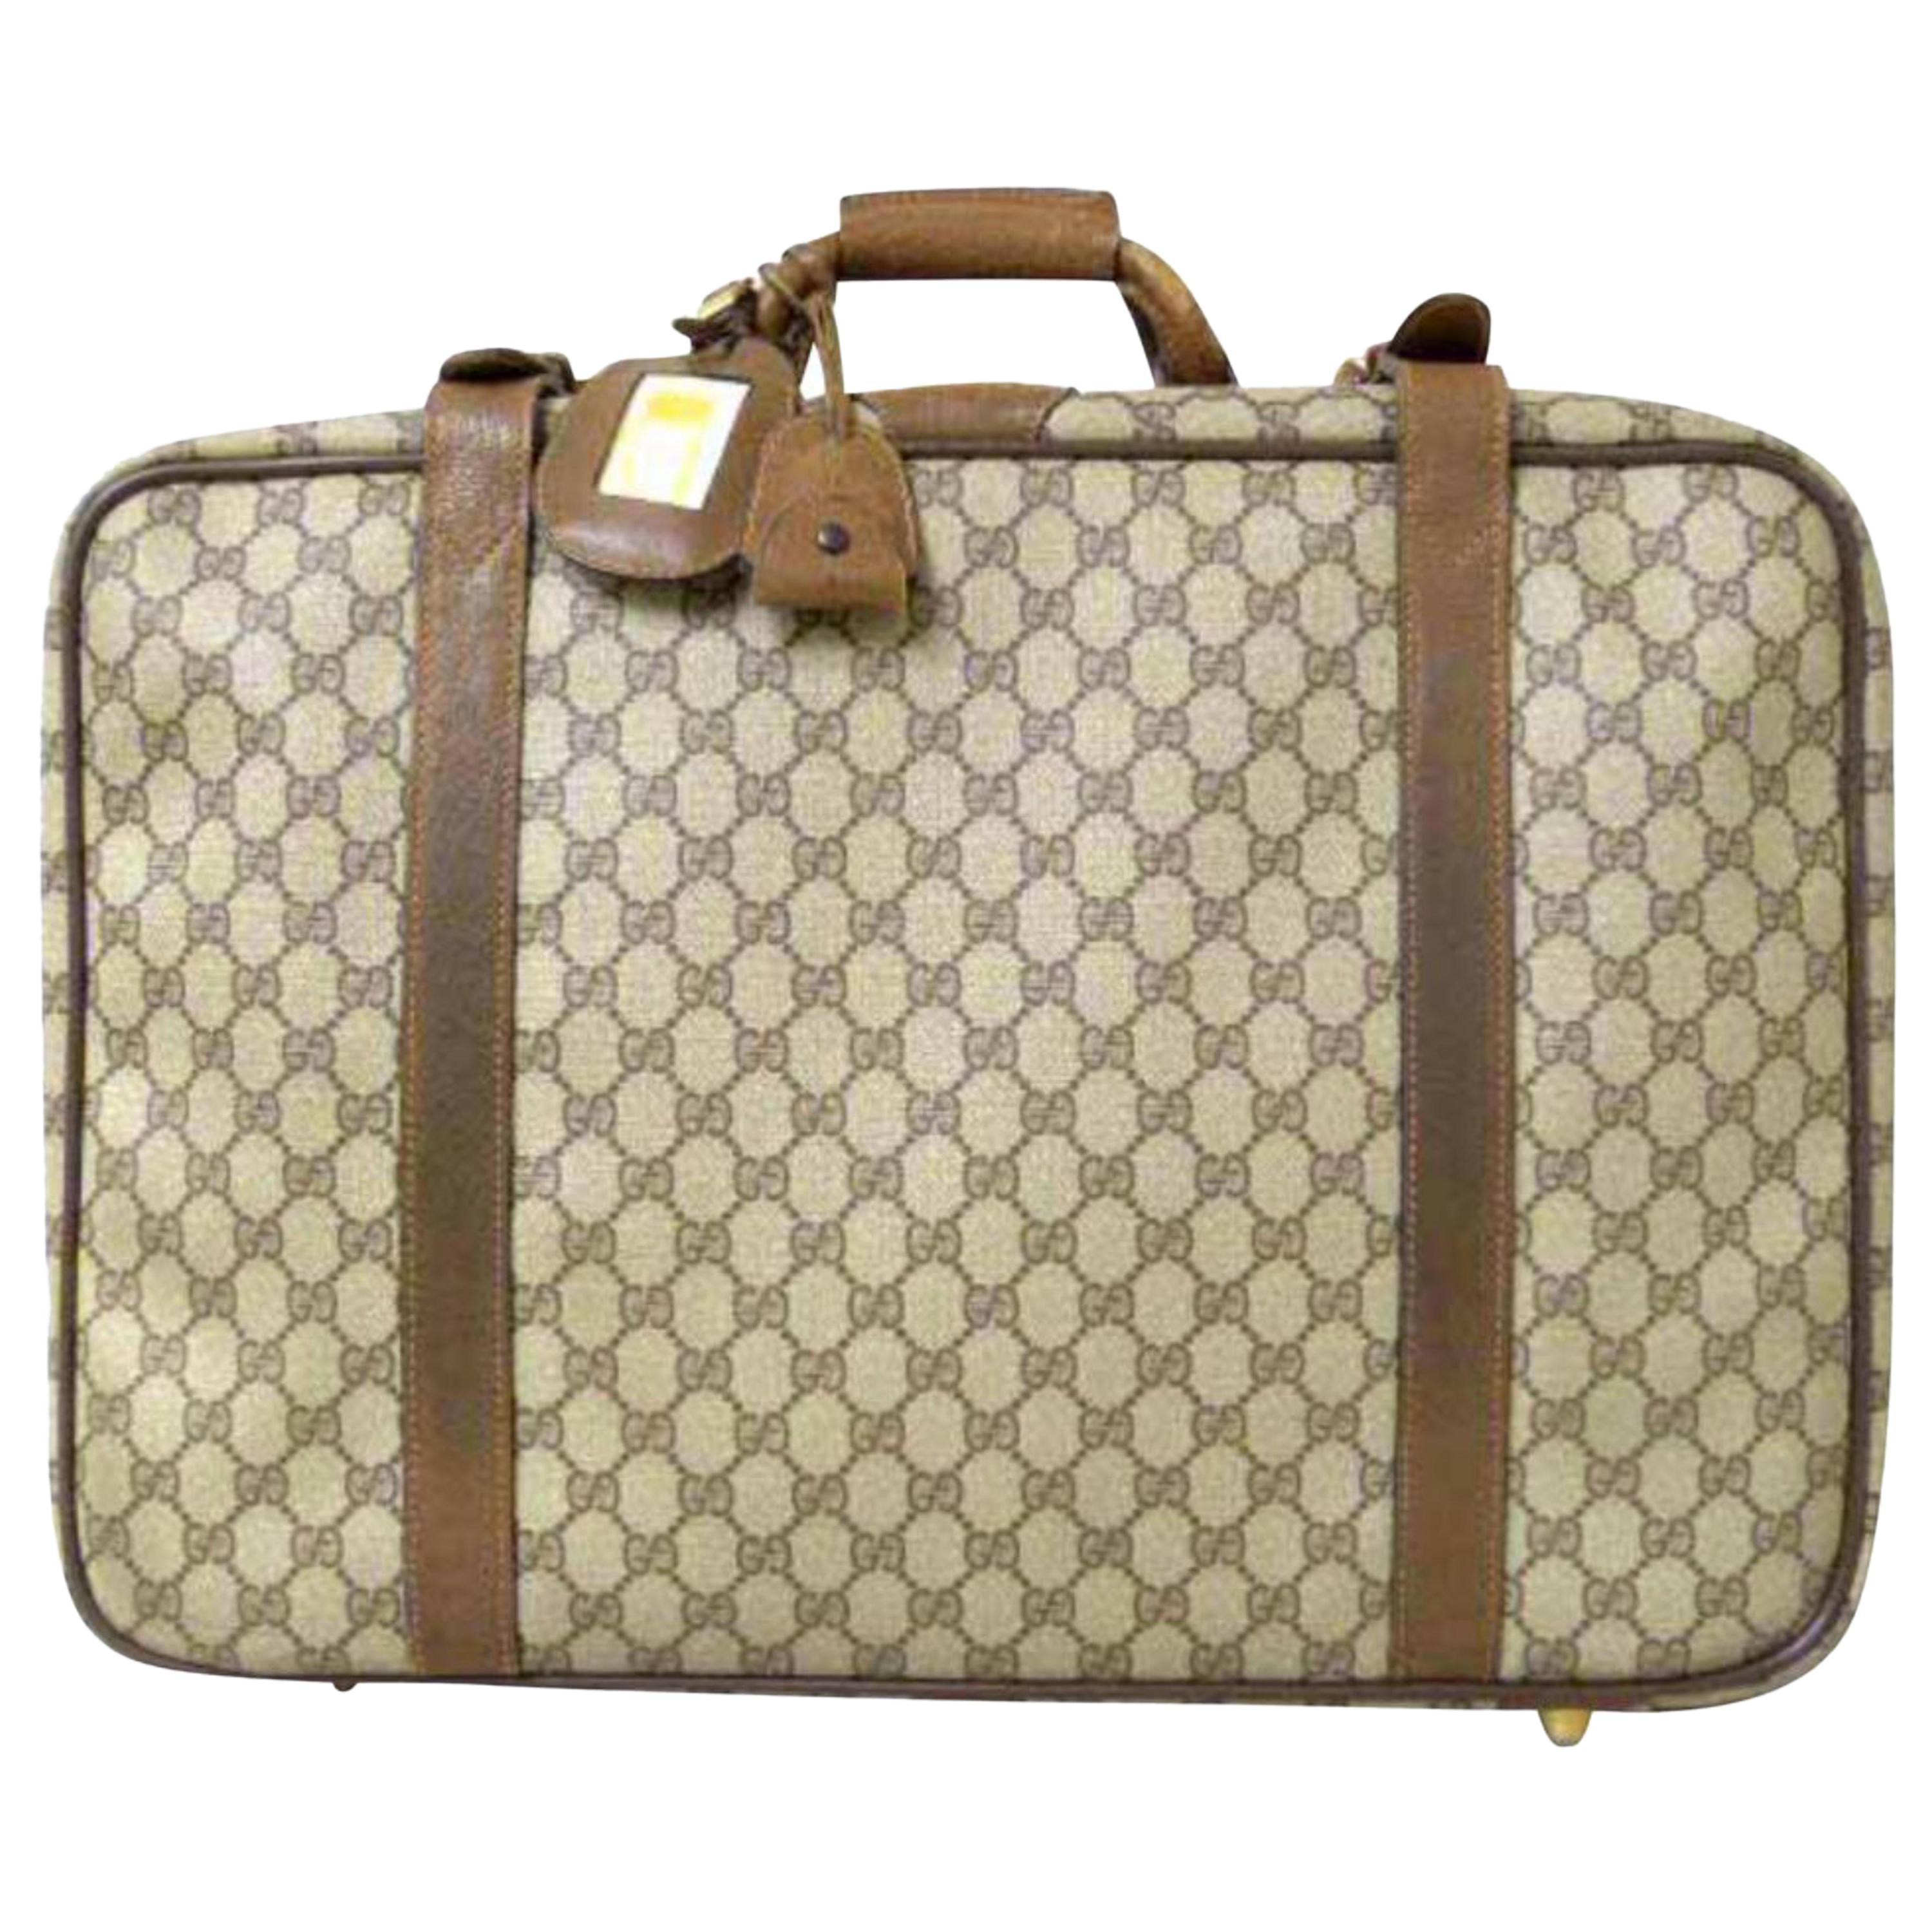 Gucci Supreme Gg Monogram Luggage 228869 Brown Coated Canvas Weekend/Travel Bag For Sale